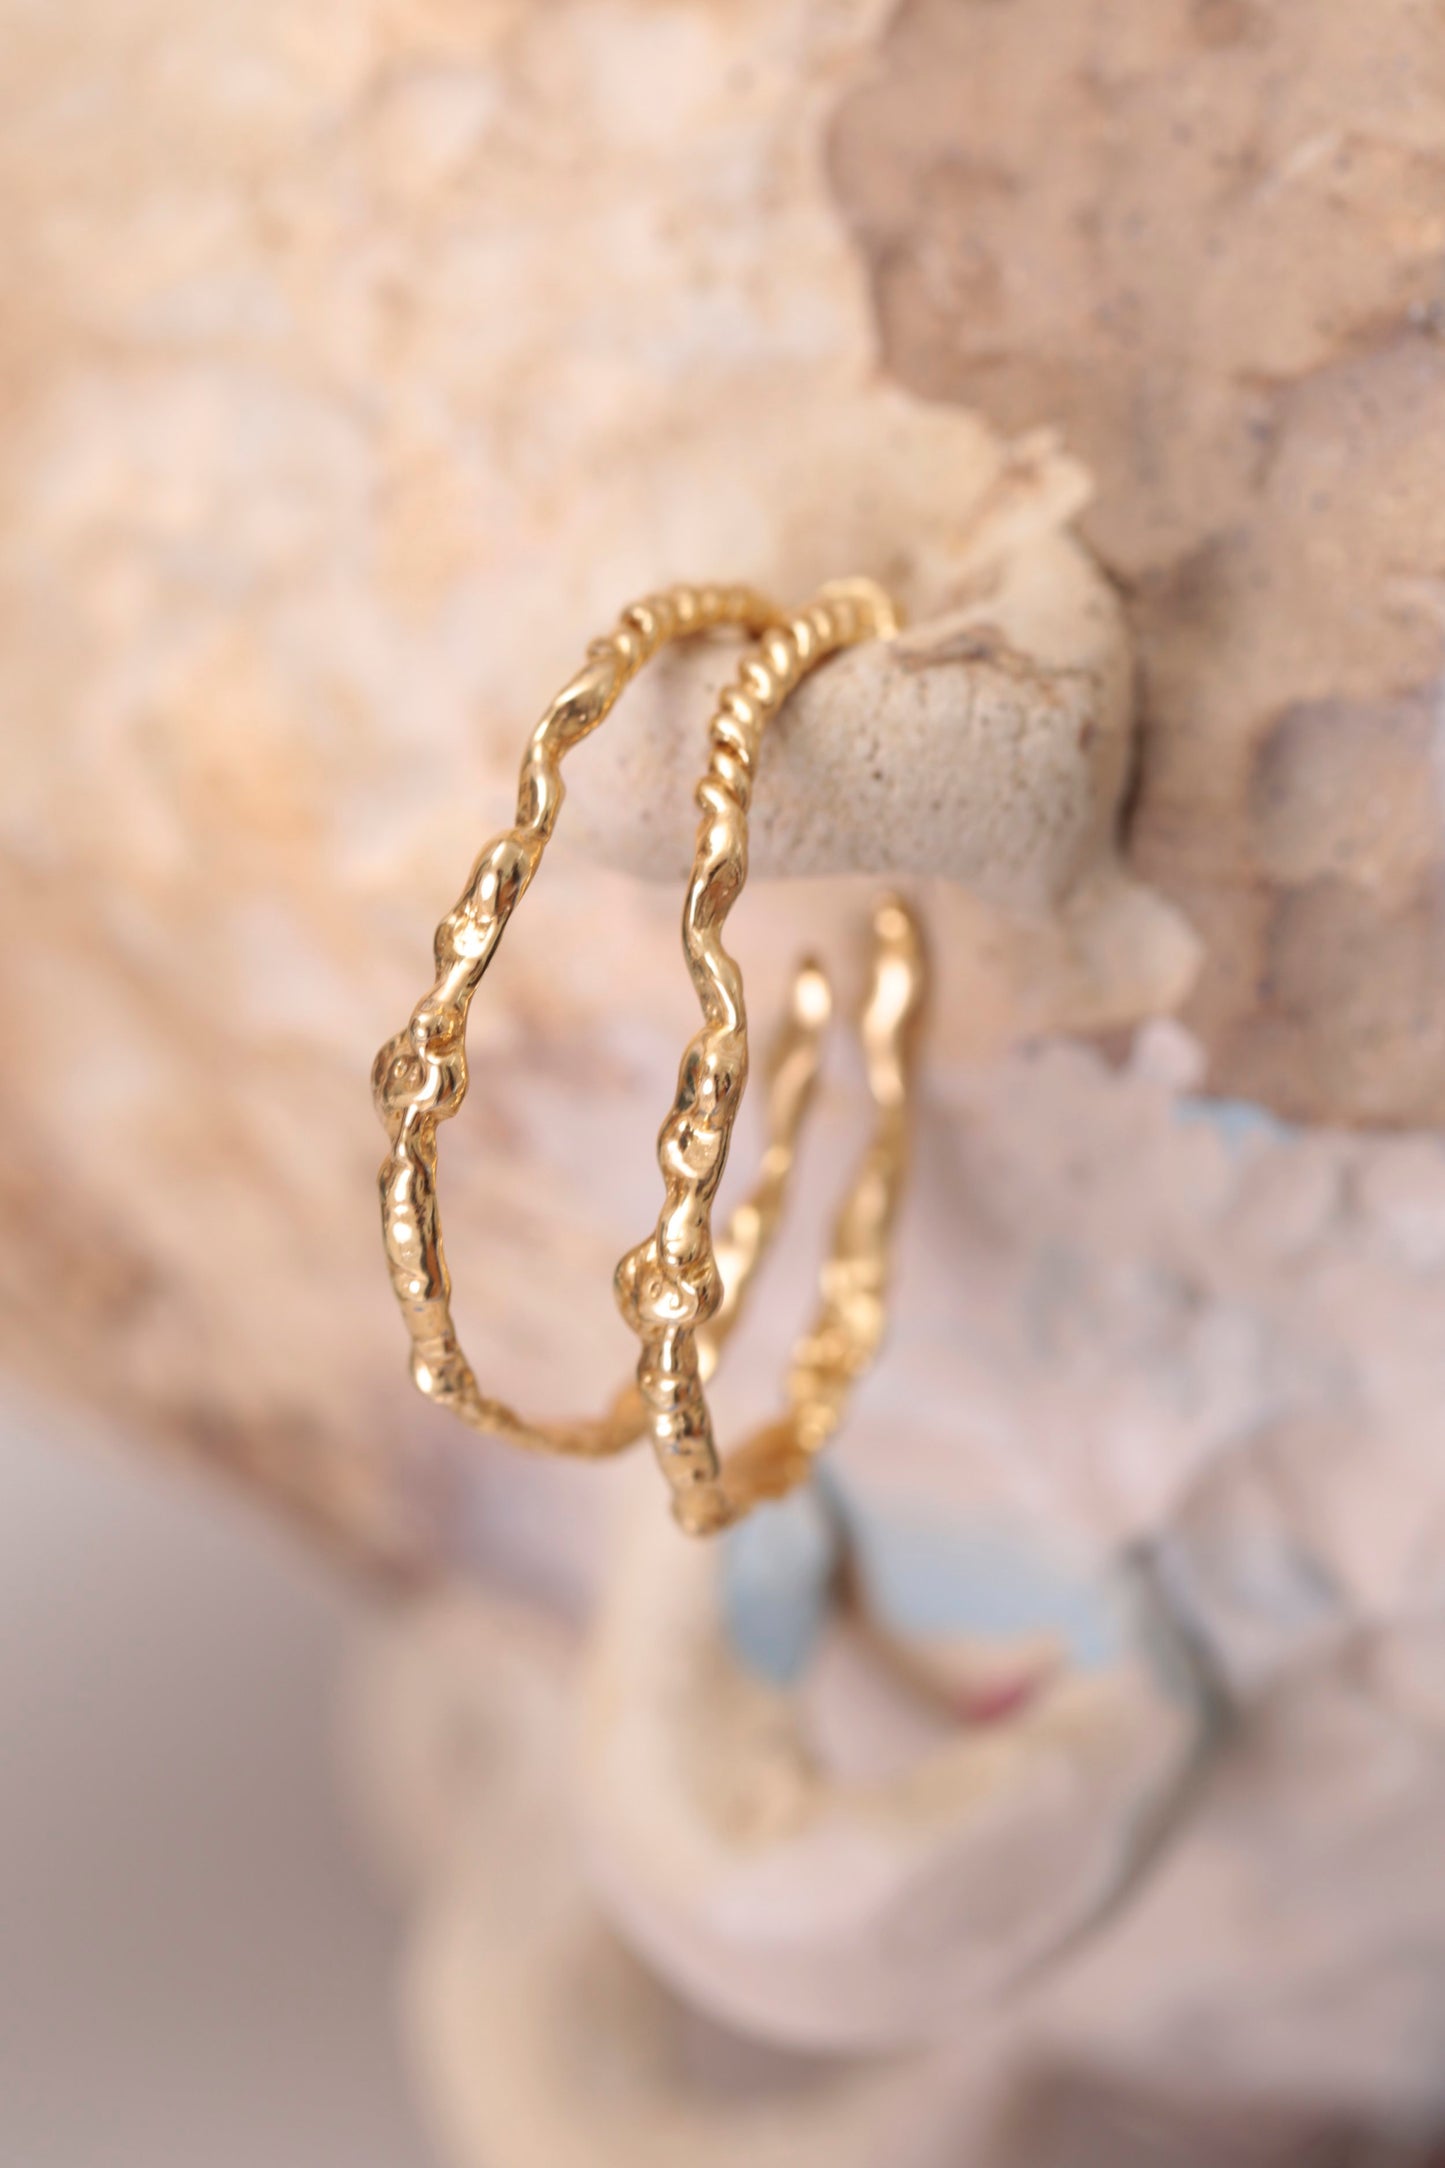 ¾ View of CLARK Sea Siren Hoop earrings, clear impressions of seashells and seafloor treasures are highlighted. These one-of-a-kind statement earrings are made using the lost wax casting method by an artist in Brooklyn. 